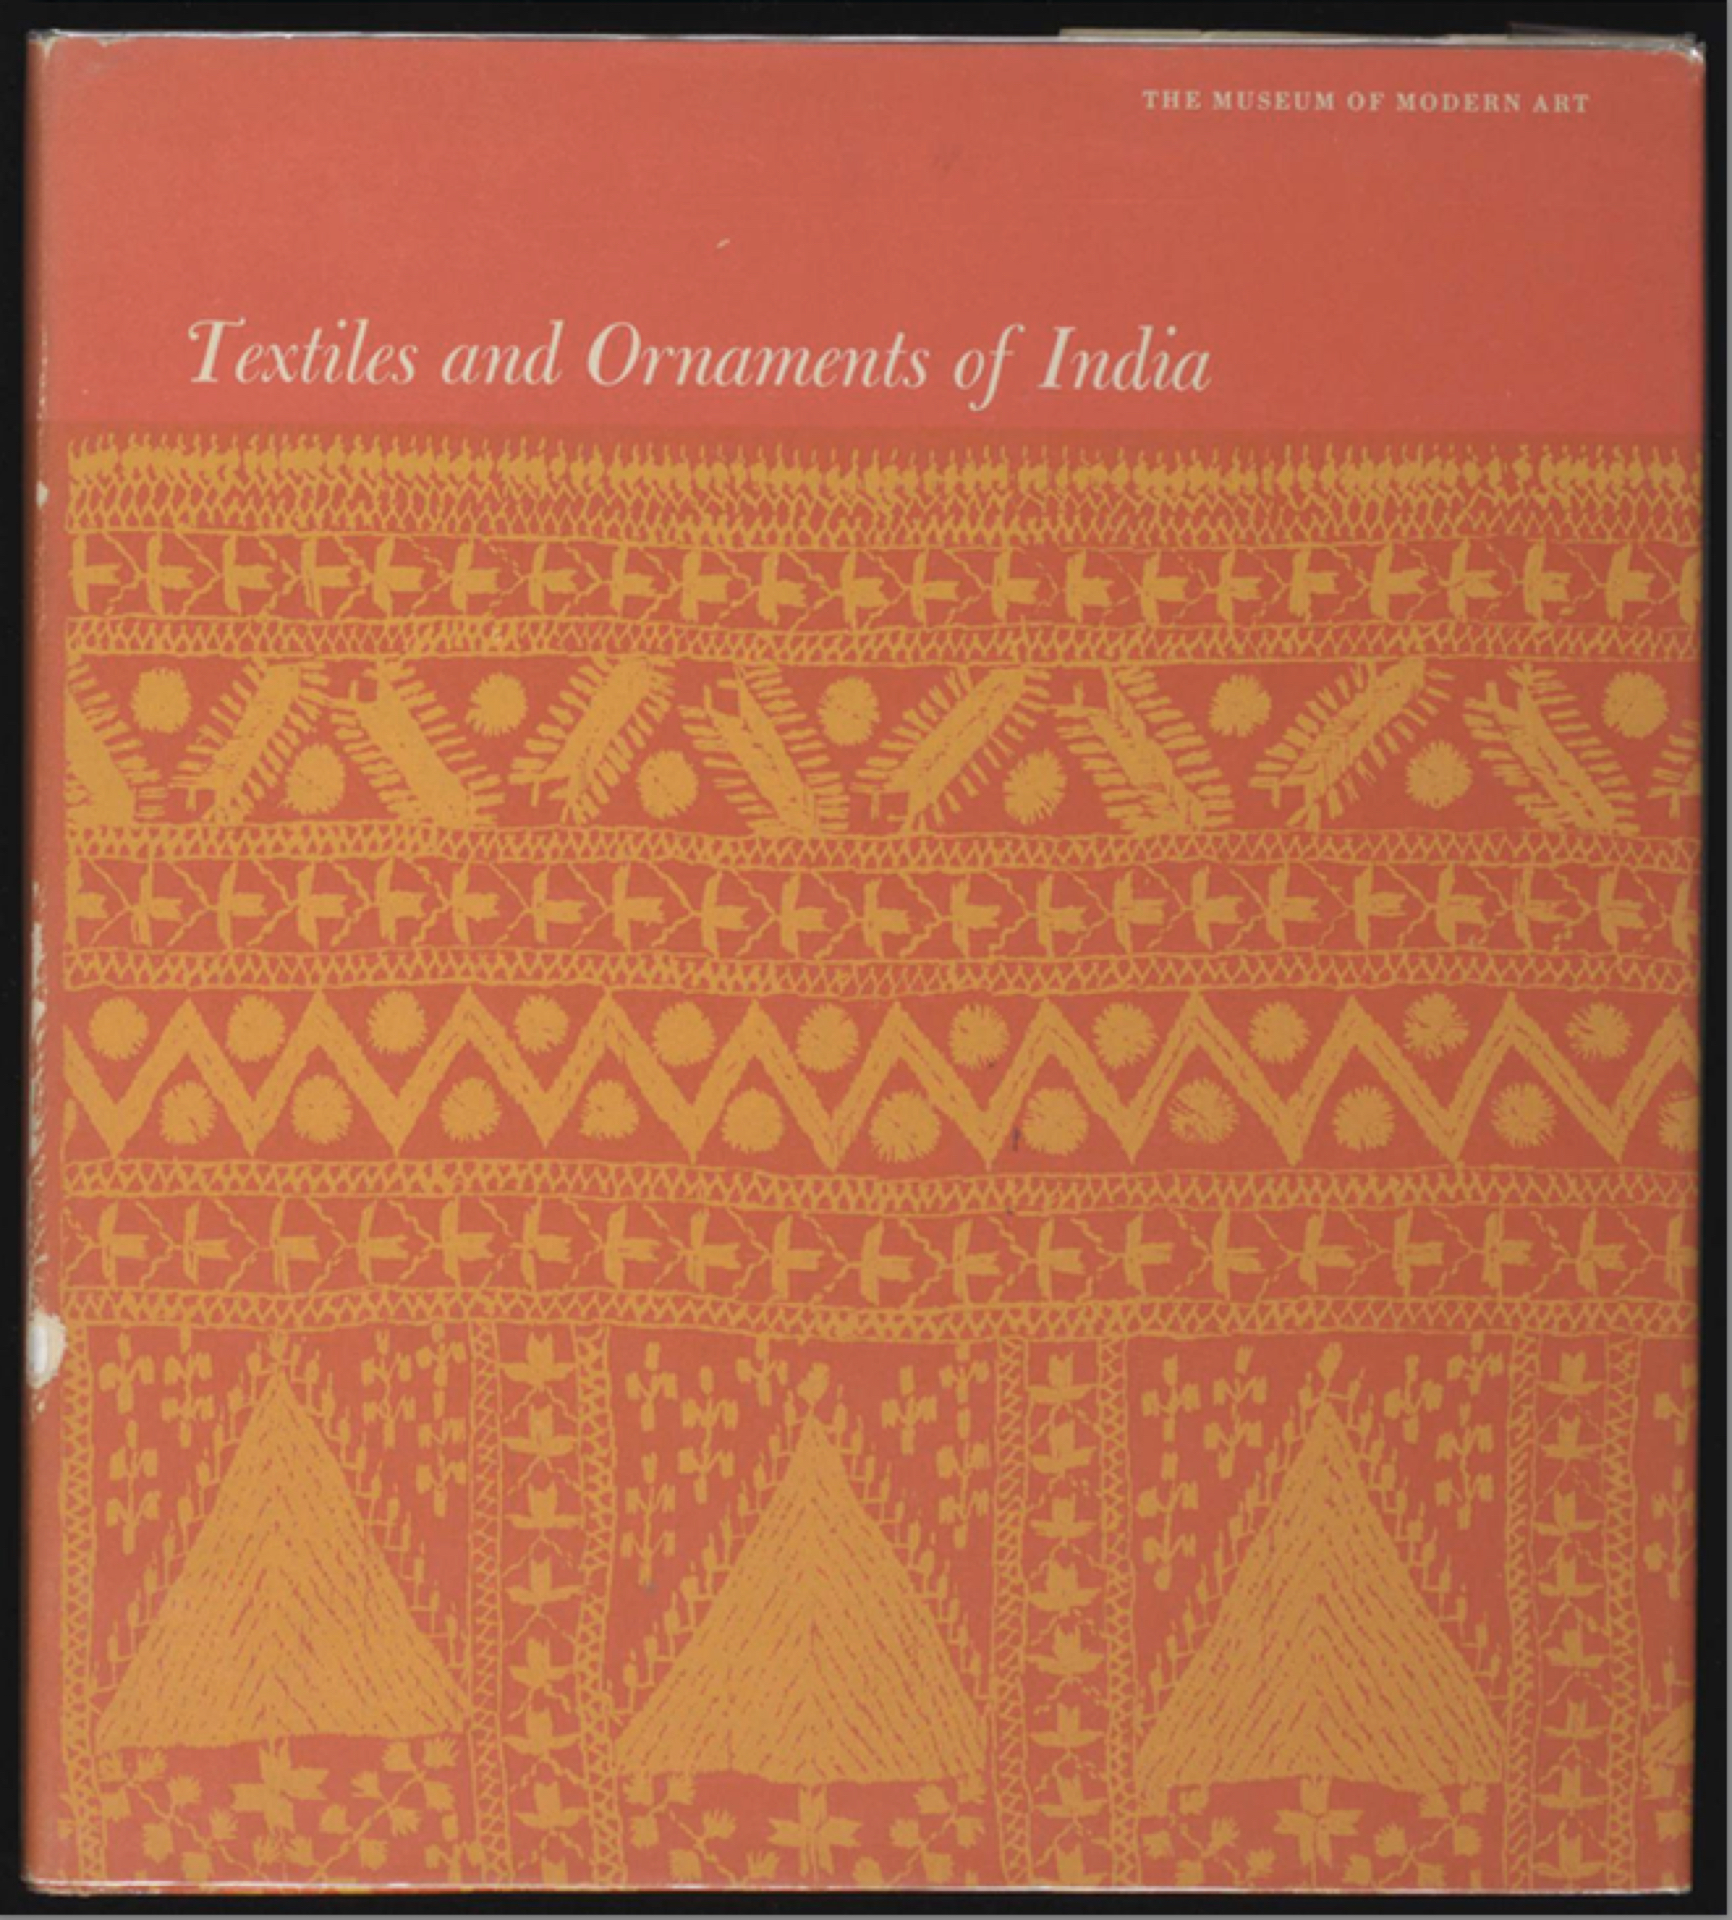 Catalogue cover of the 1955 MoMA exhibition Textiles and Ornamental Arts of India.